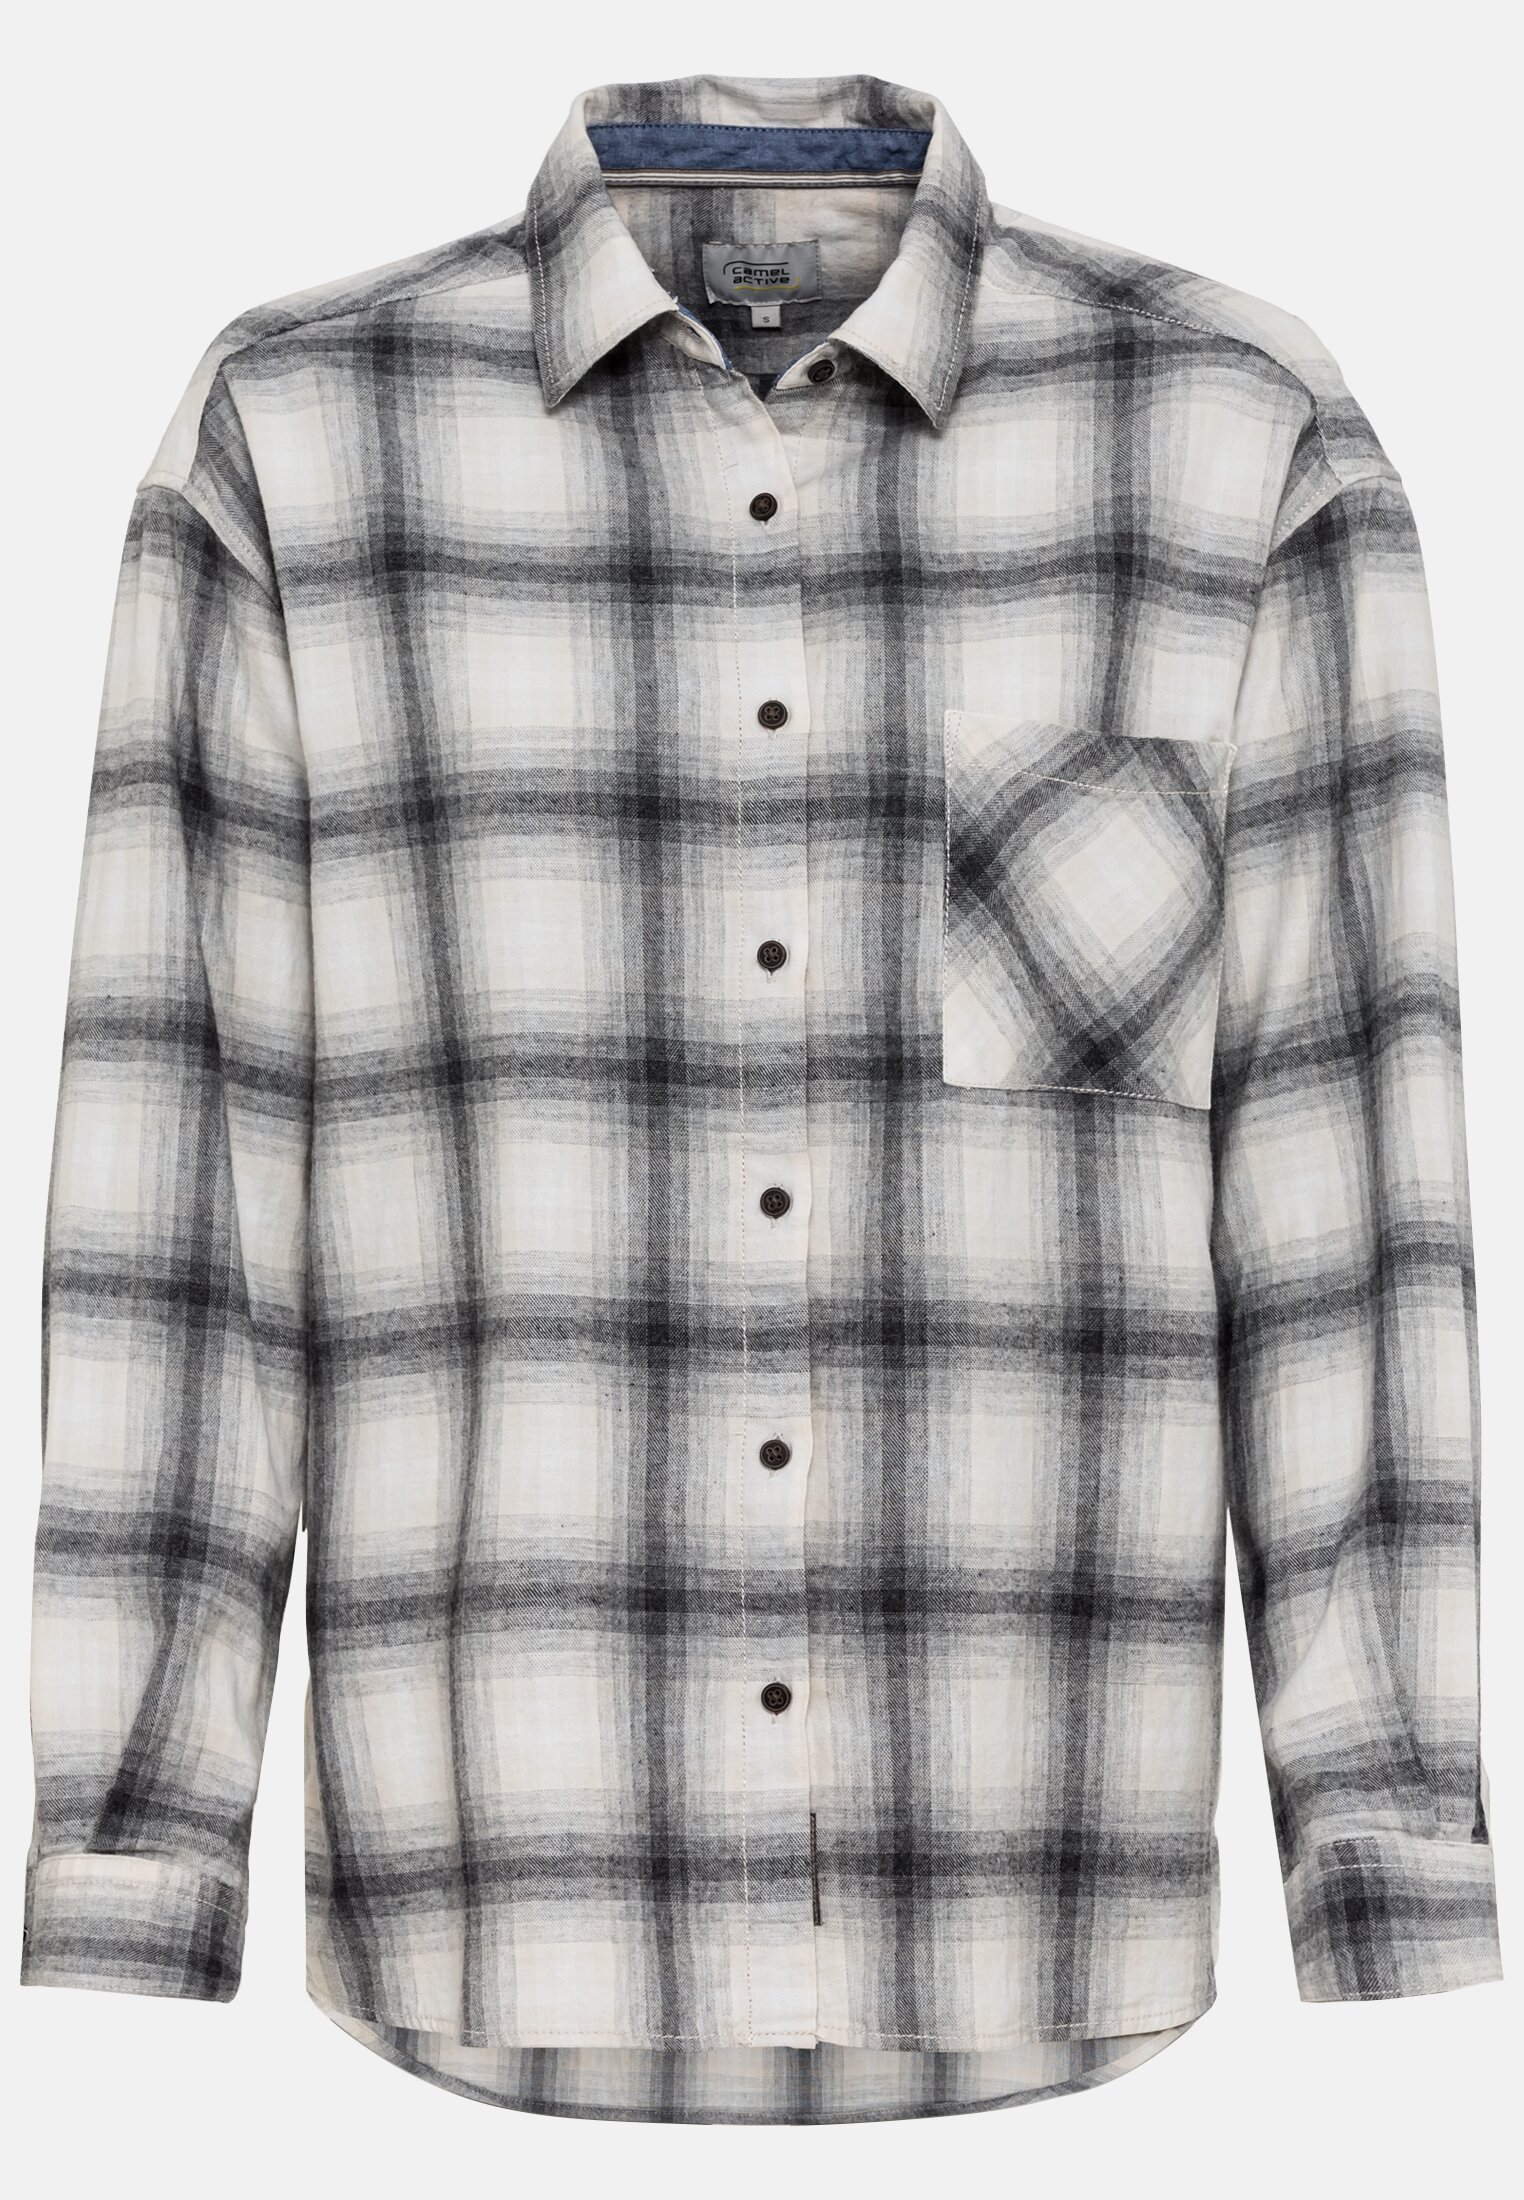 Camel Active Blouse in checked flannel